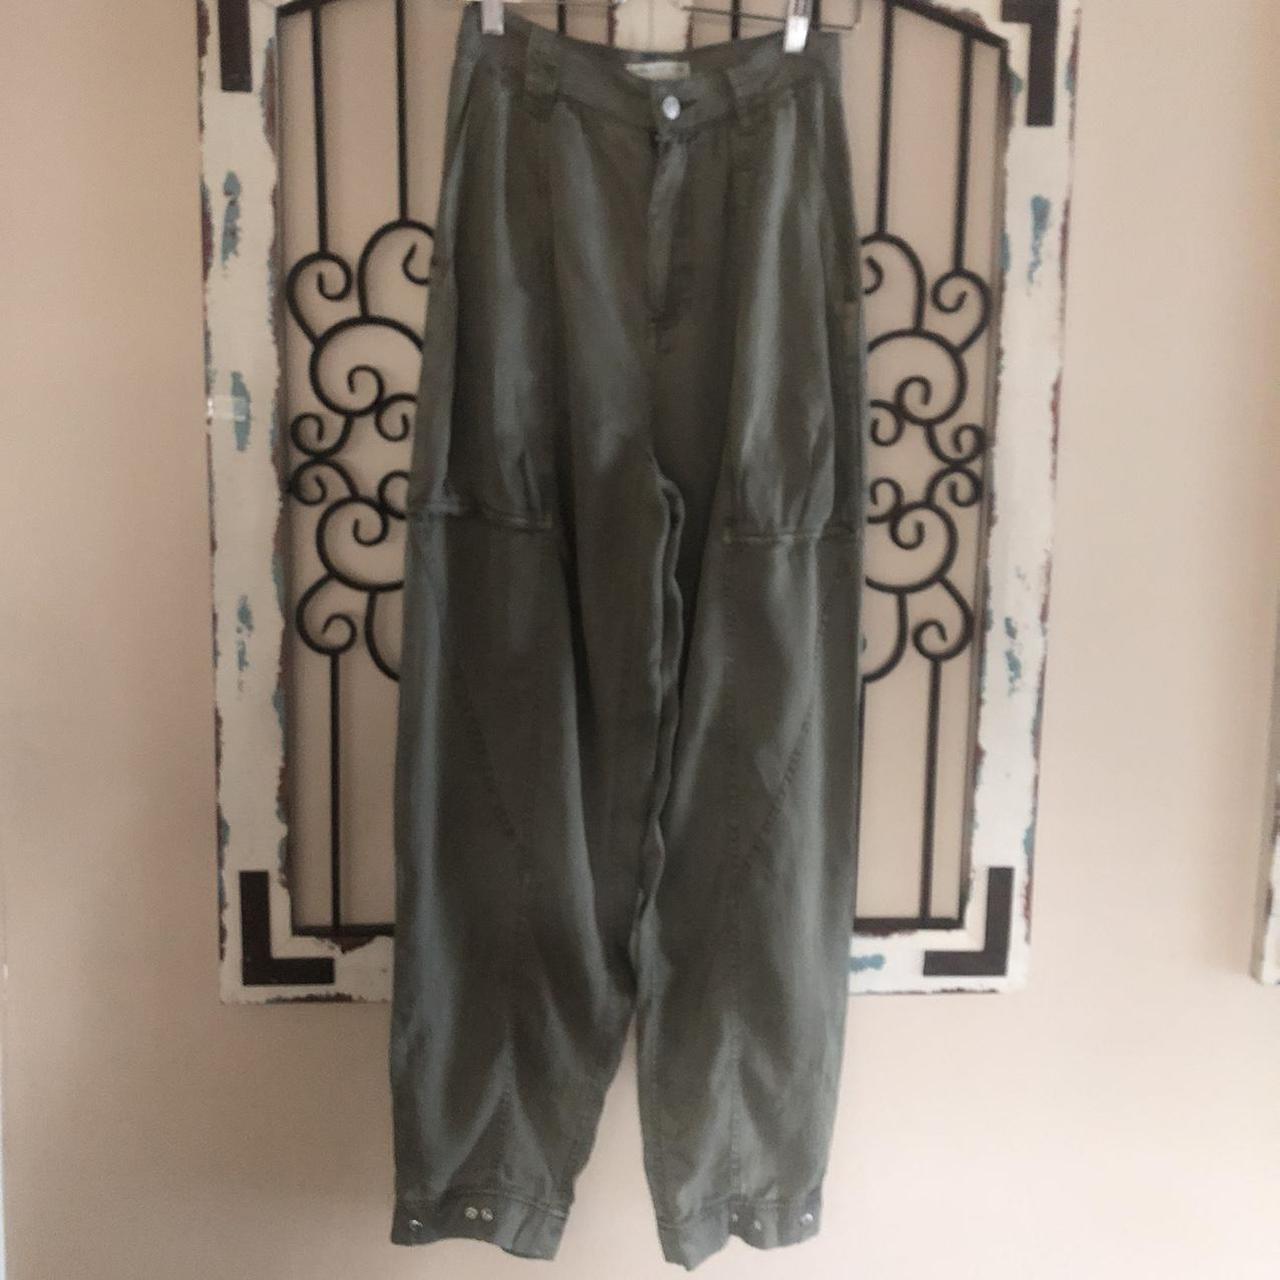 Urban Outfitters Women's Khaki and Green Trousers